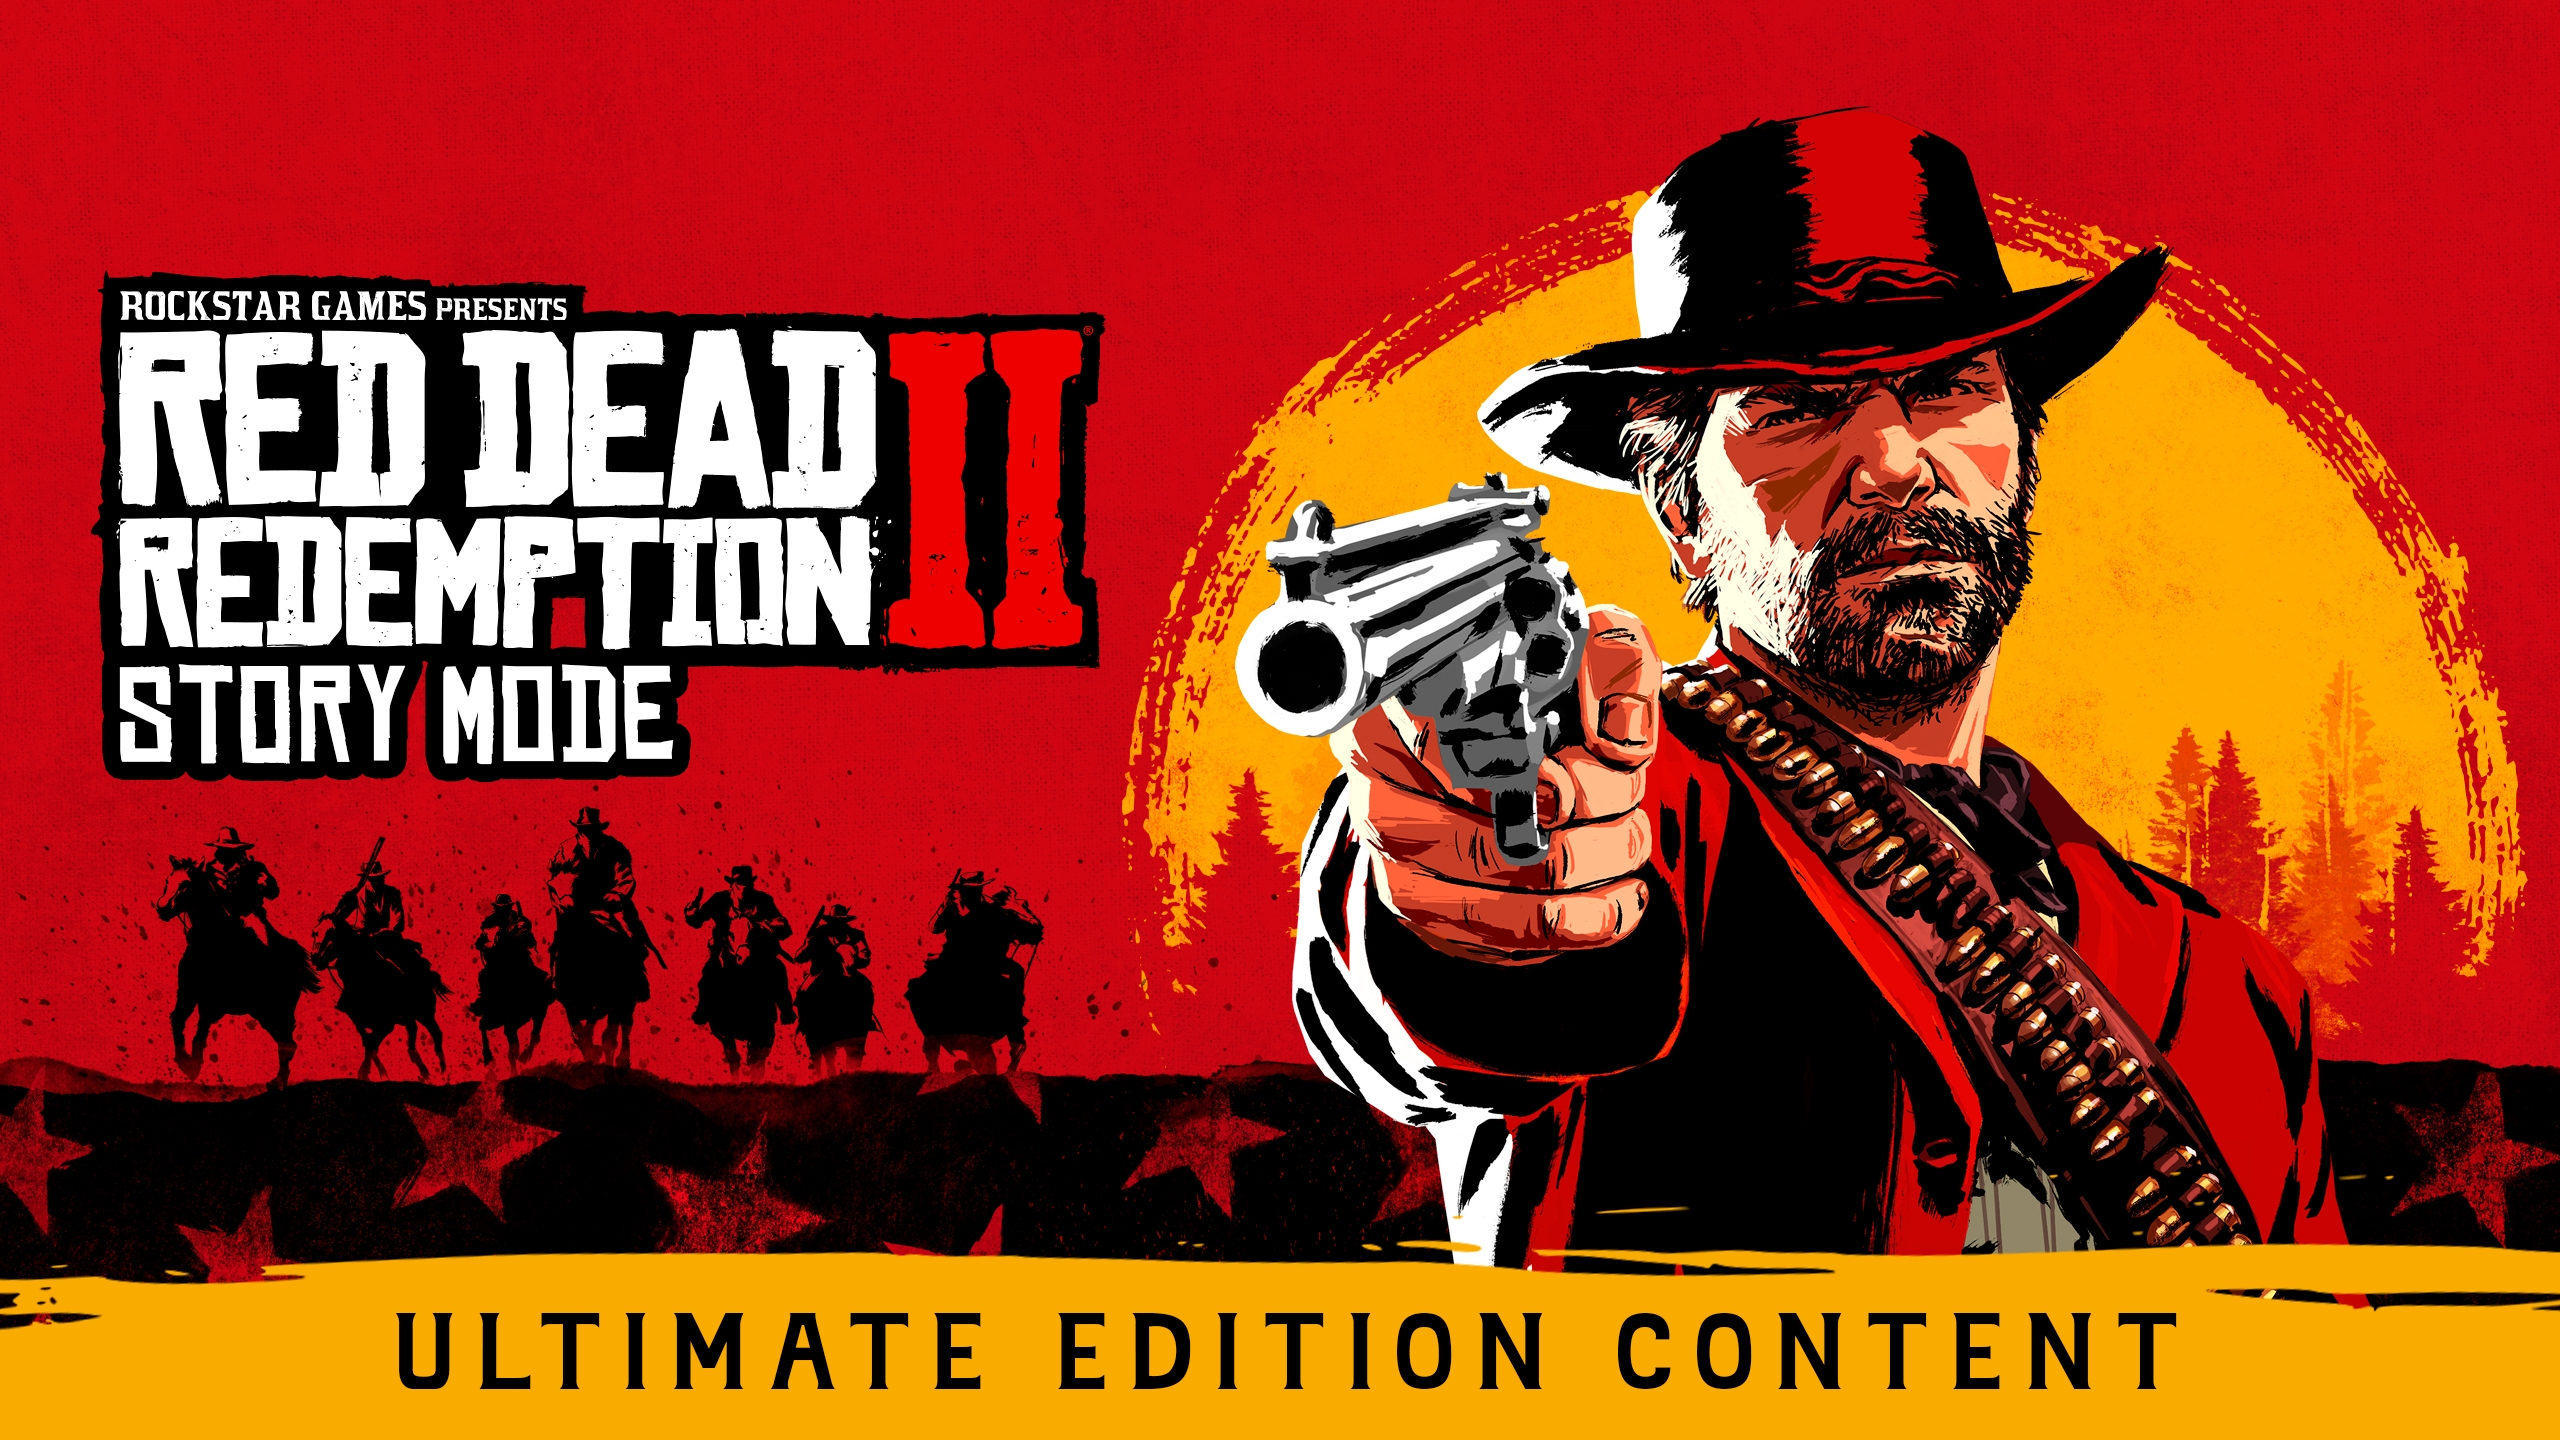 Red Dead Redemption 2 Xbox One X Review